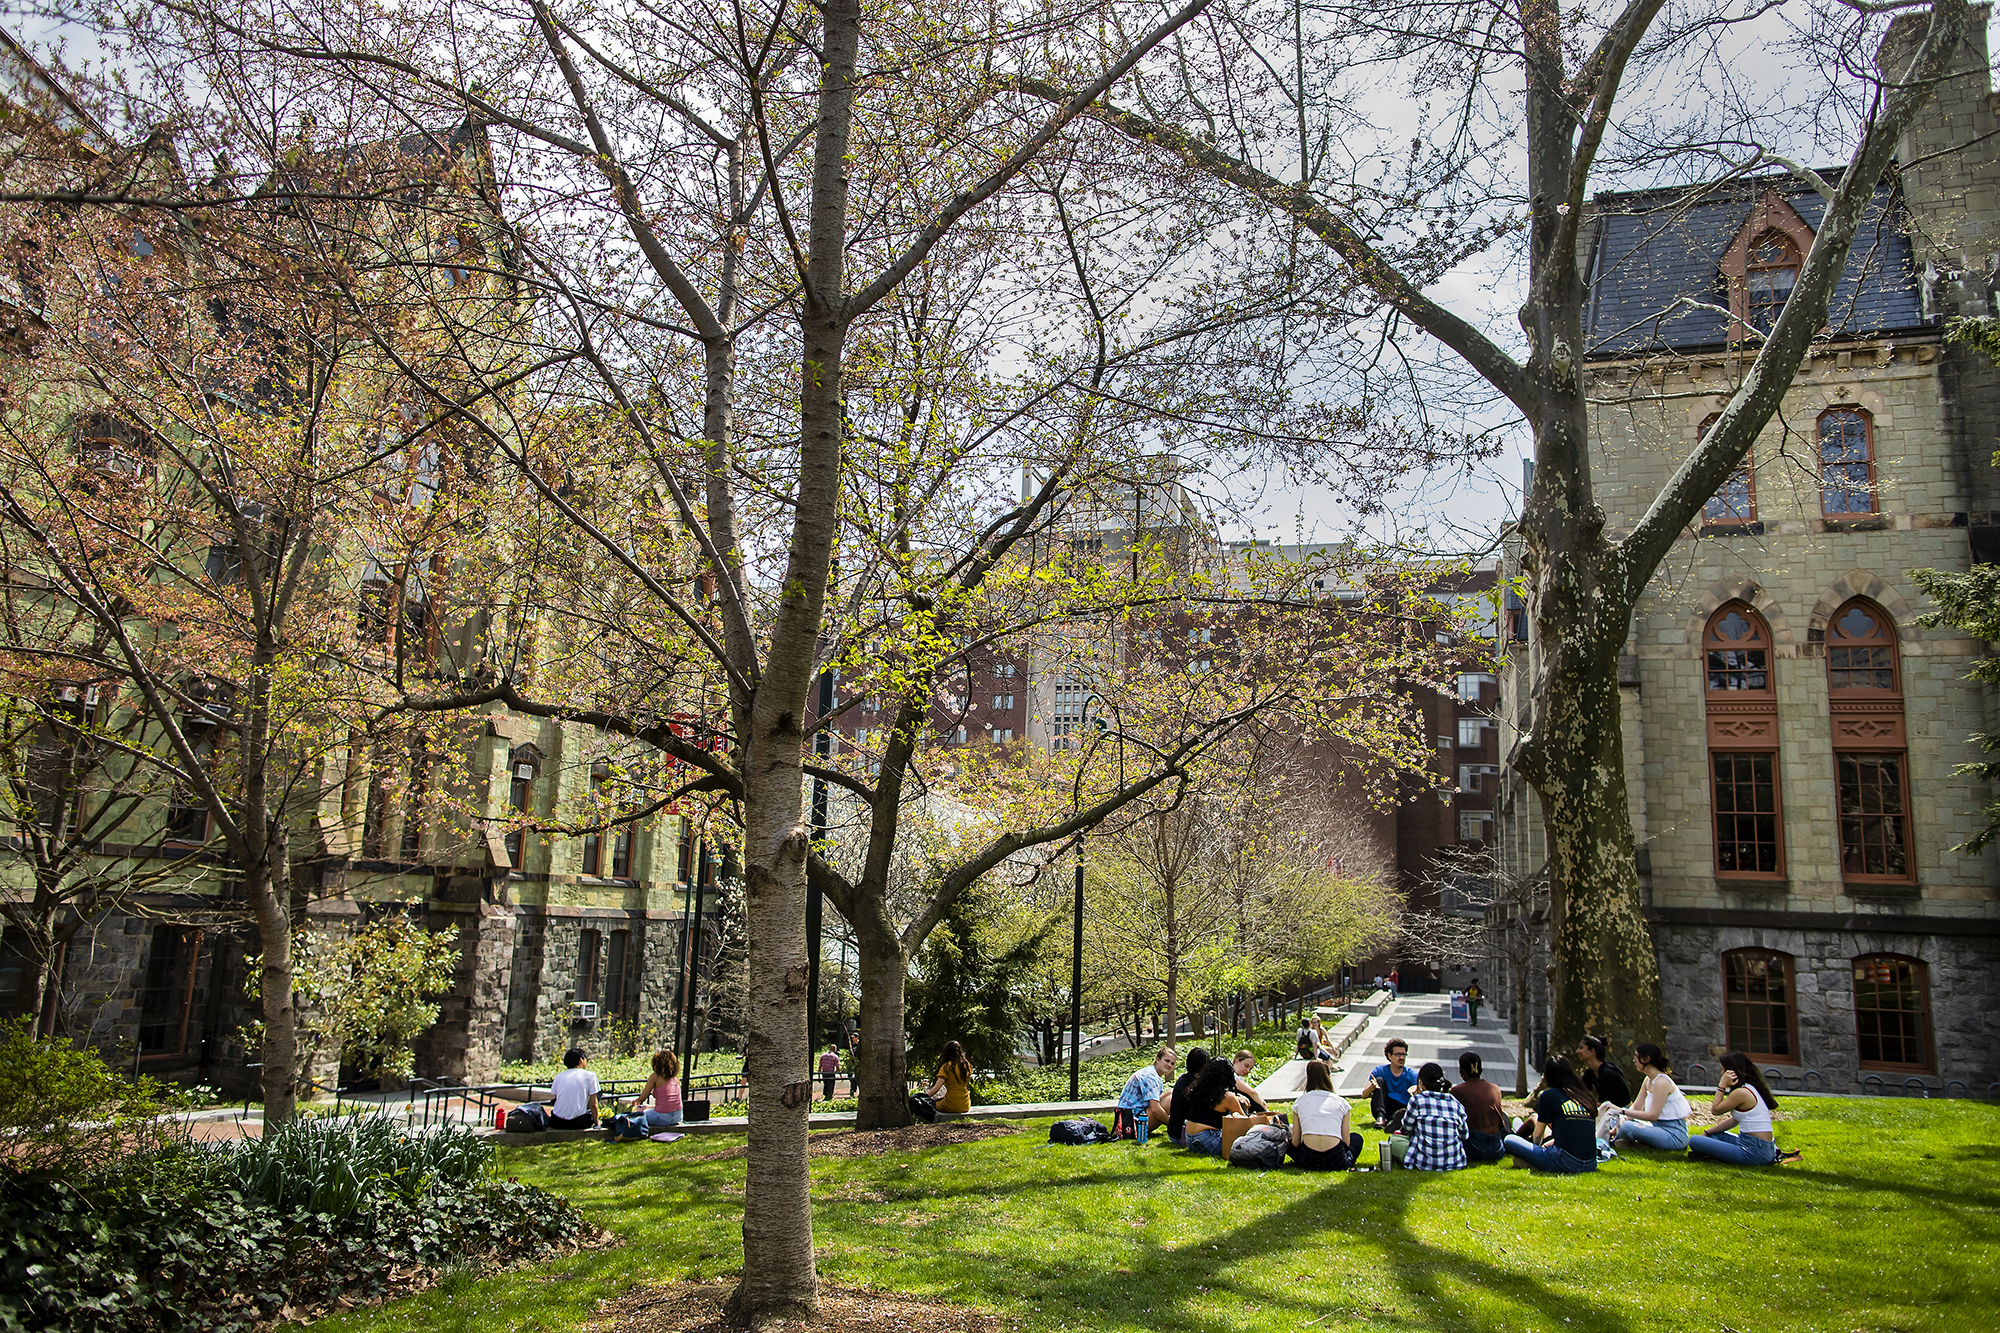 People sitting under trees in the middle of Penn campus.